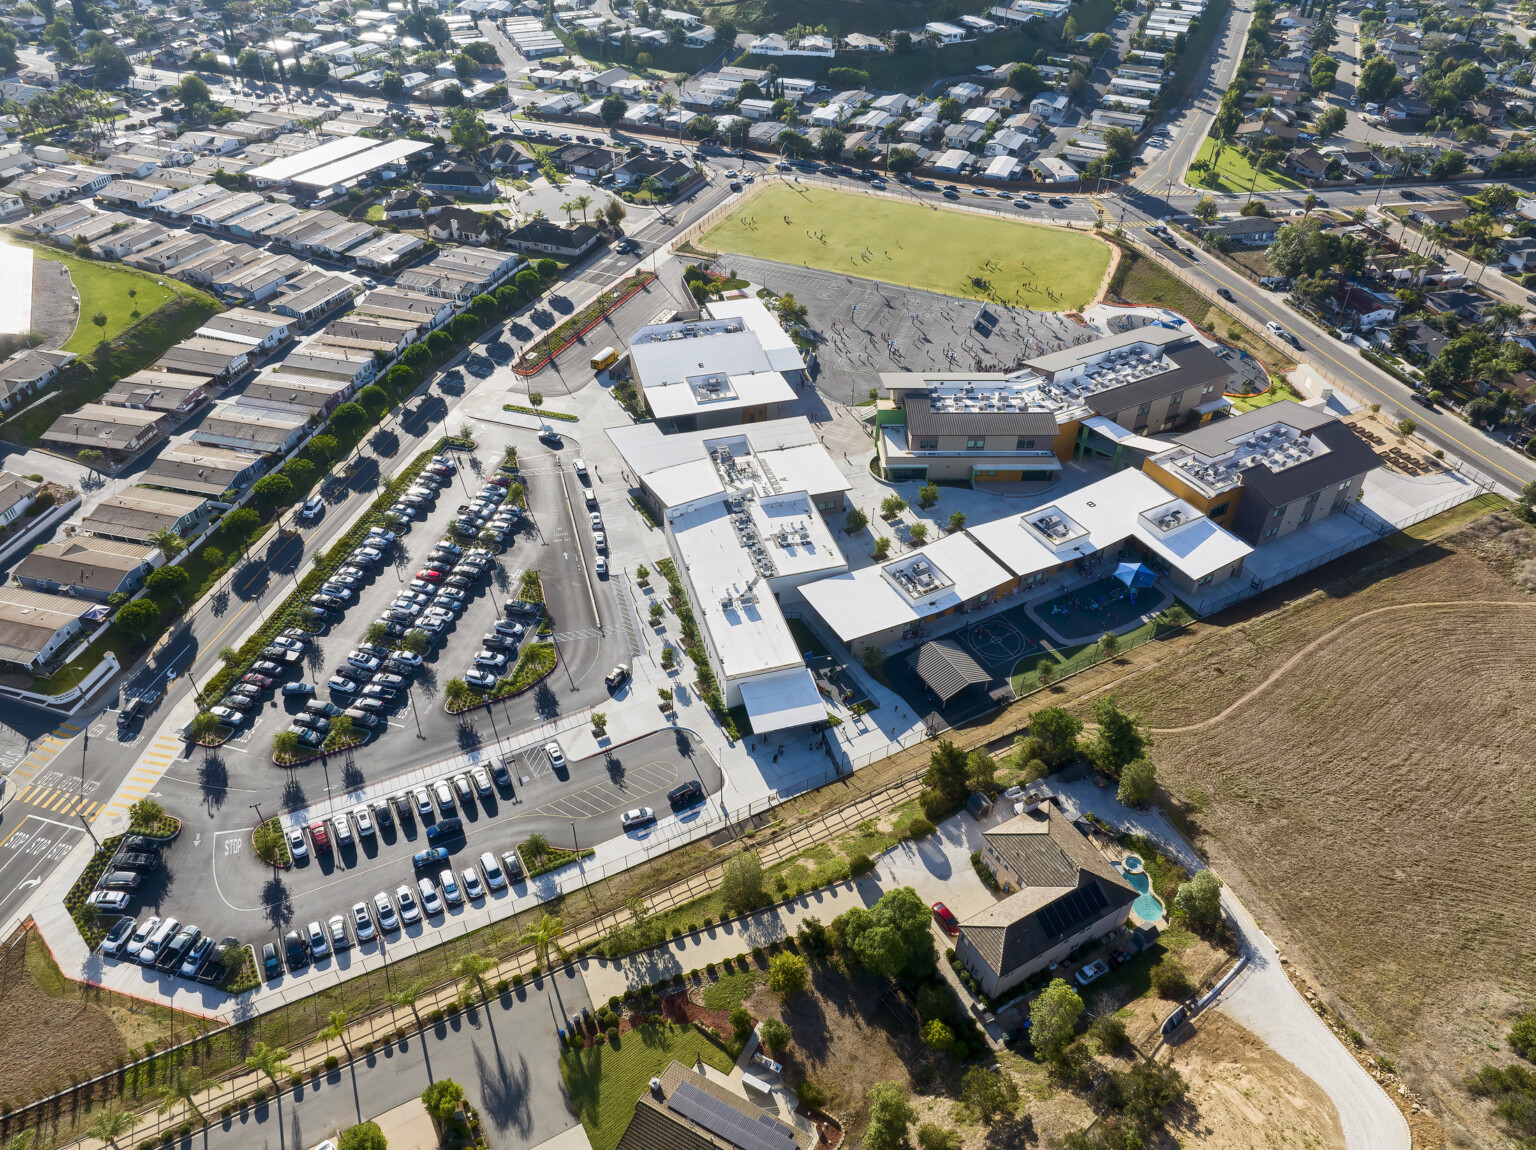 Aerial view of Richland Elementary School campus site